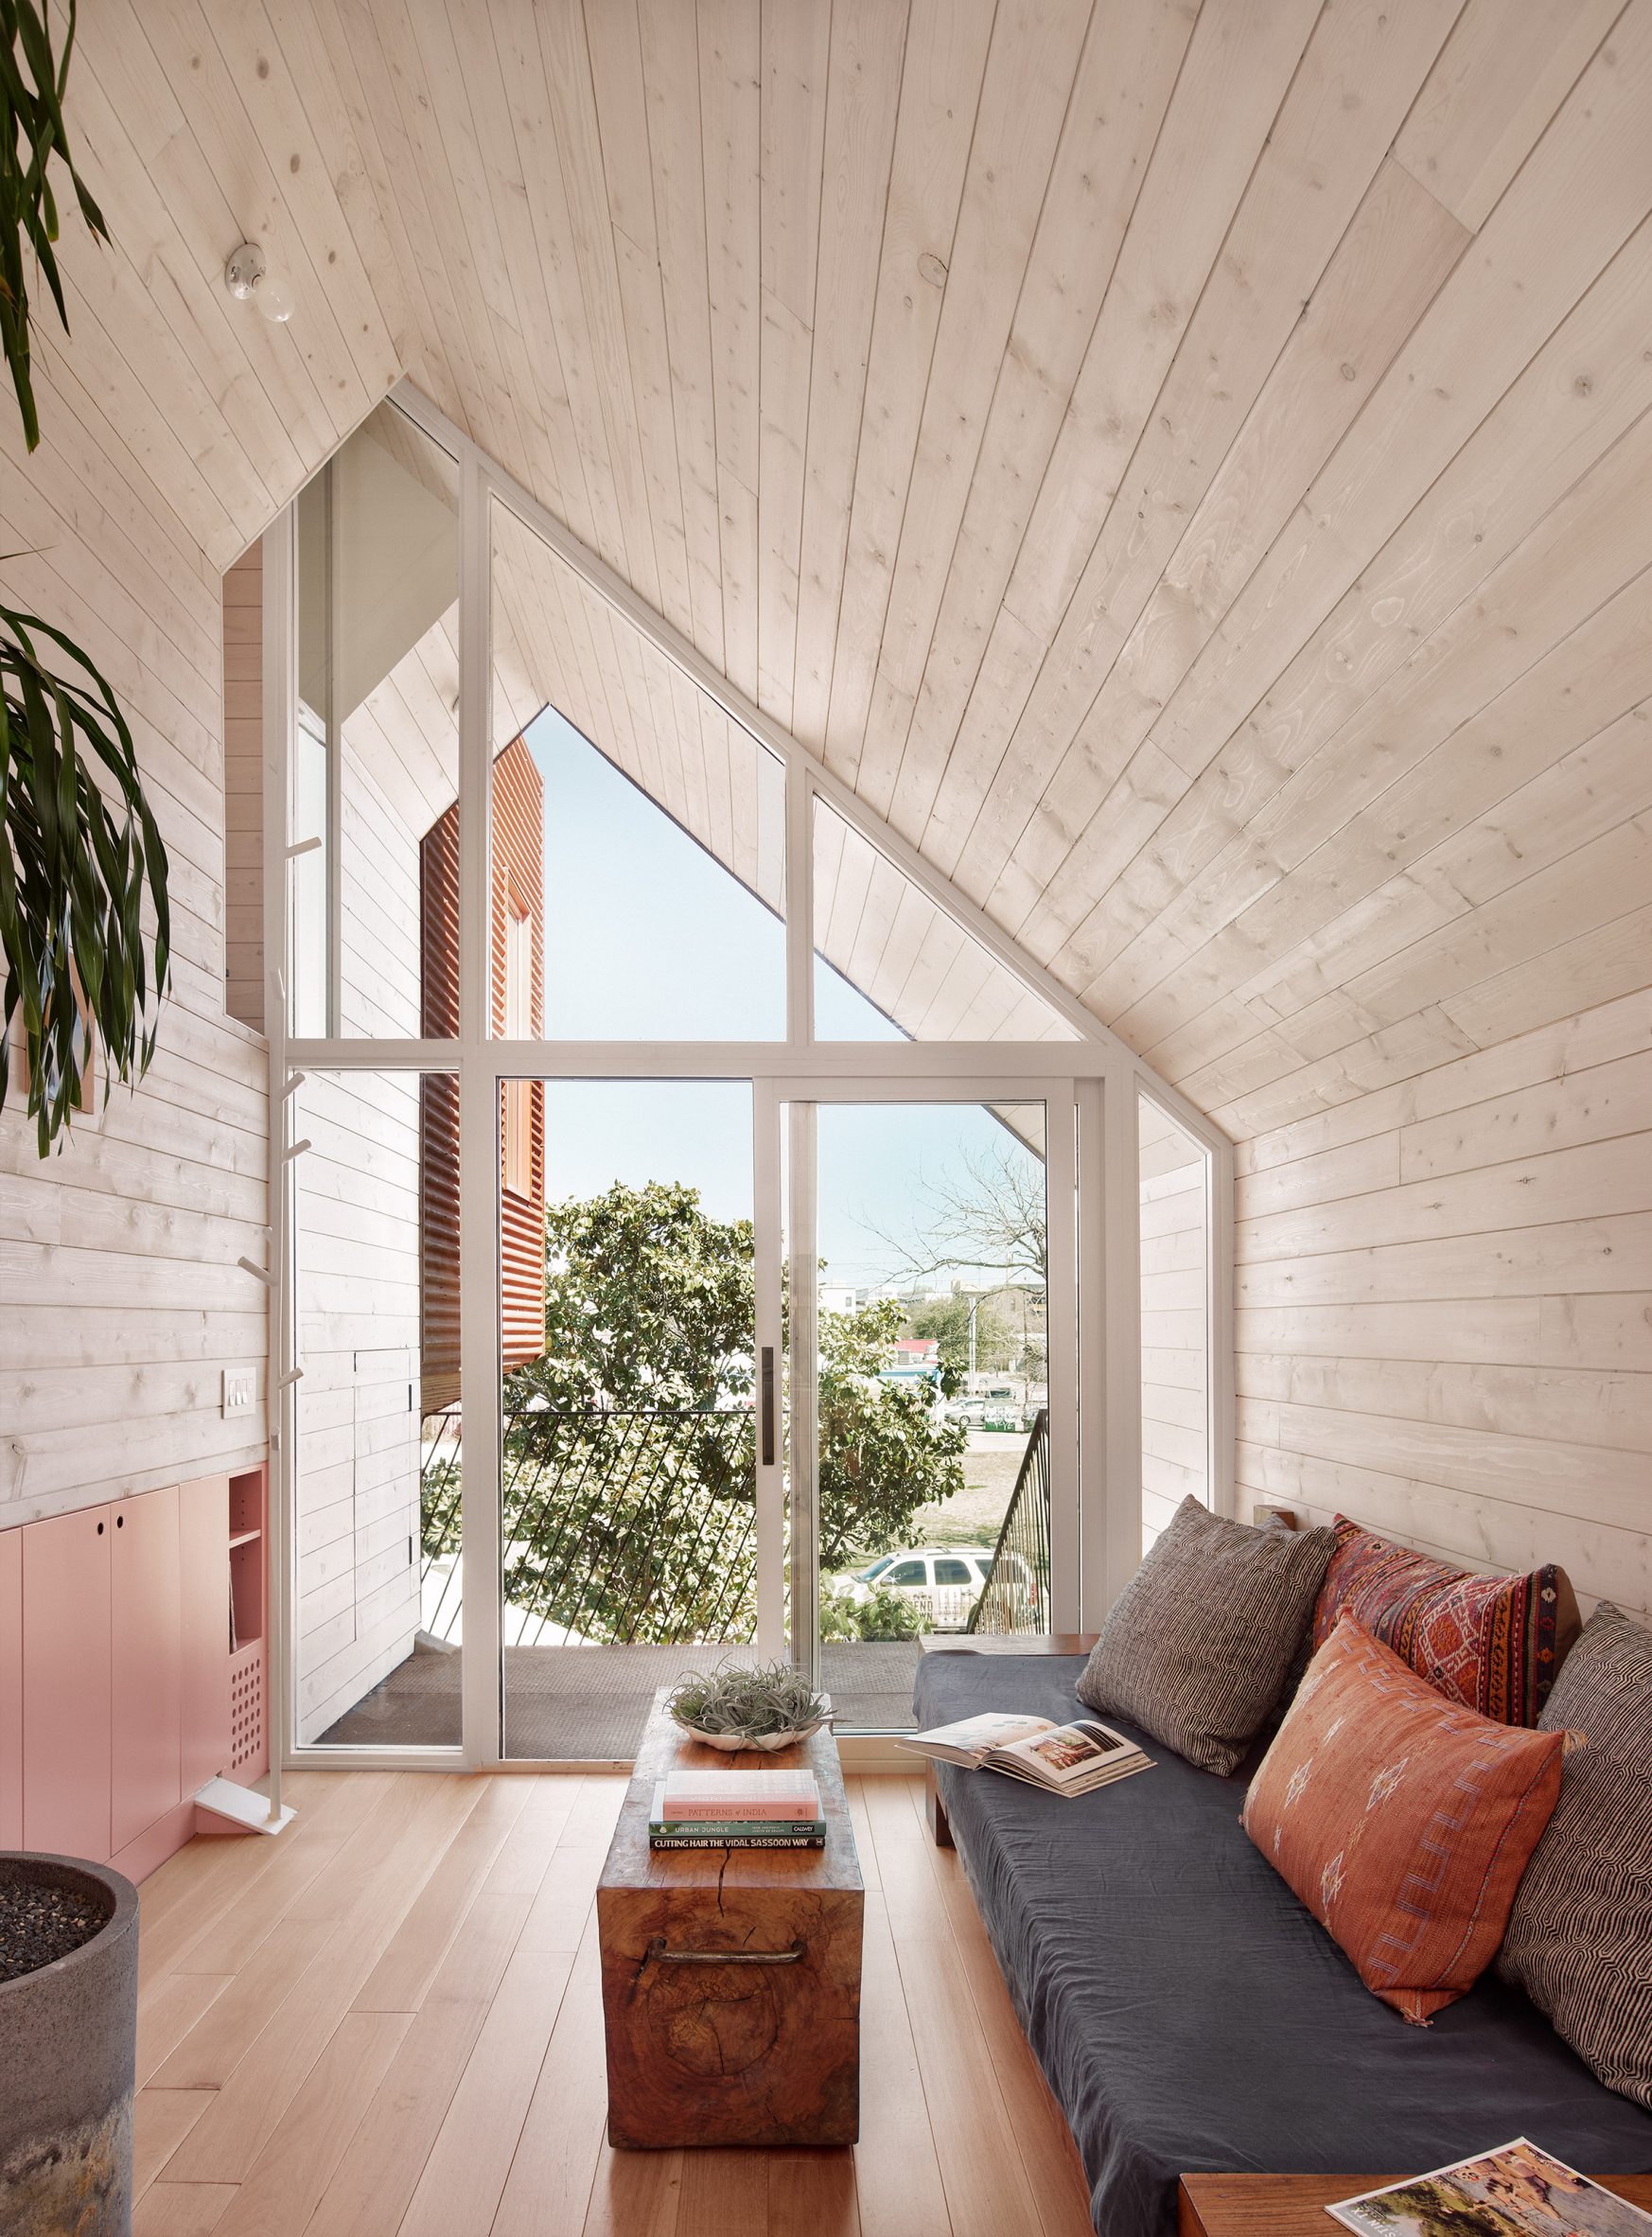 Angular windows in The Perch residential guesthouse extension by Nicole Blair